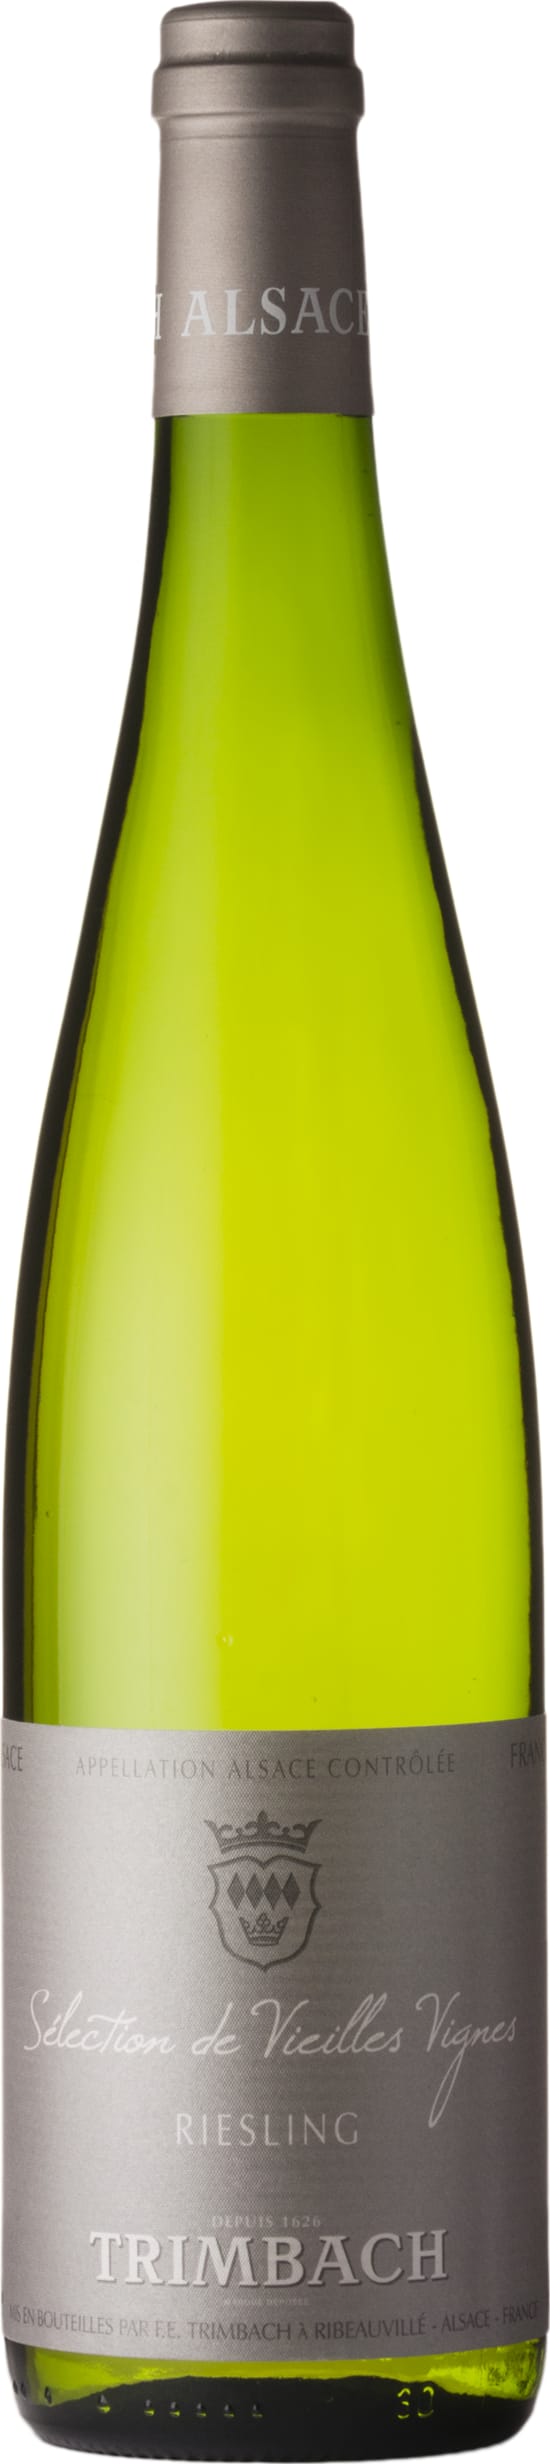 Trimbach Riesling Selection De Vieilles Vignes 2021 75cl - Buy Trimbach Wines from GREAT WINES DIRECT wine shop